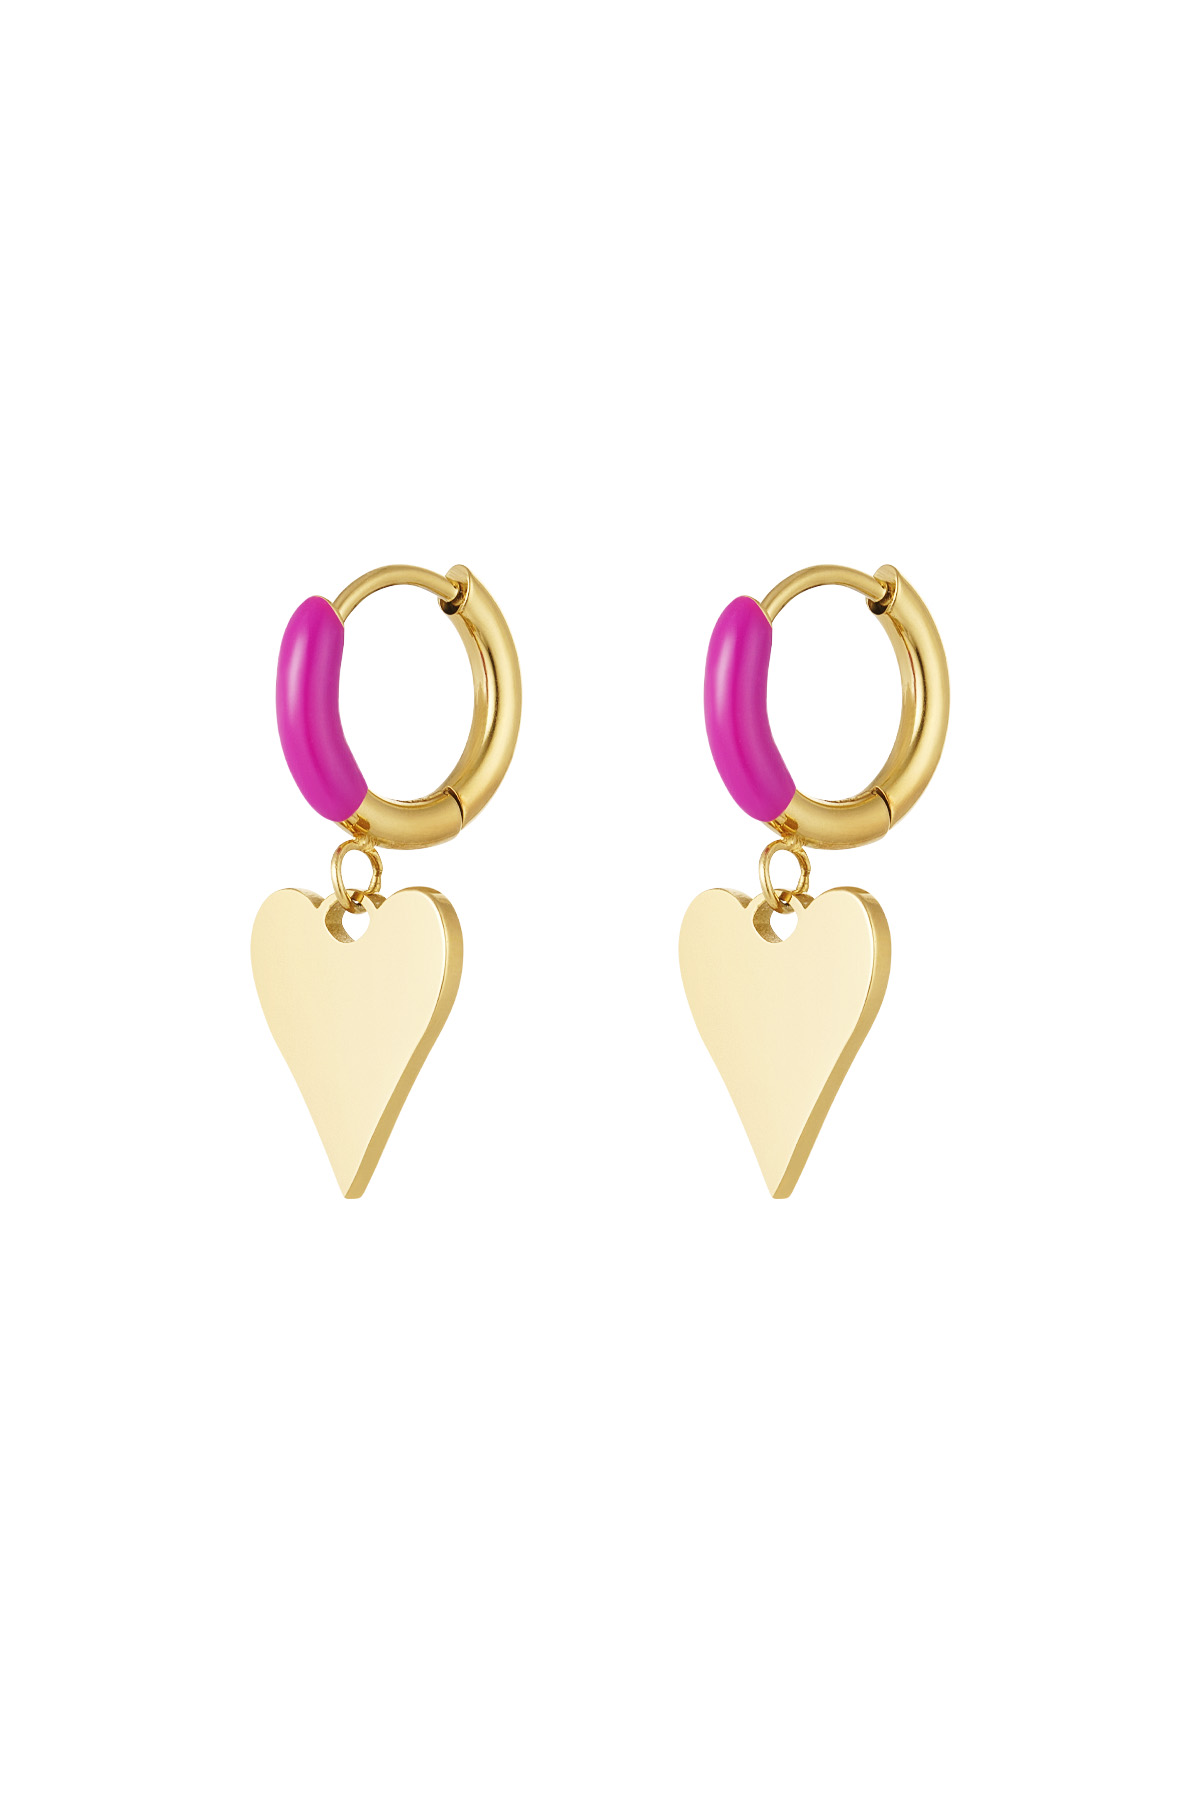 Colorful heart earrings - gold/pink